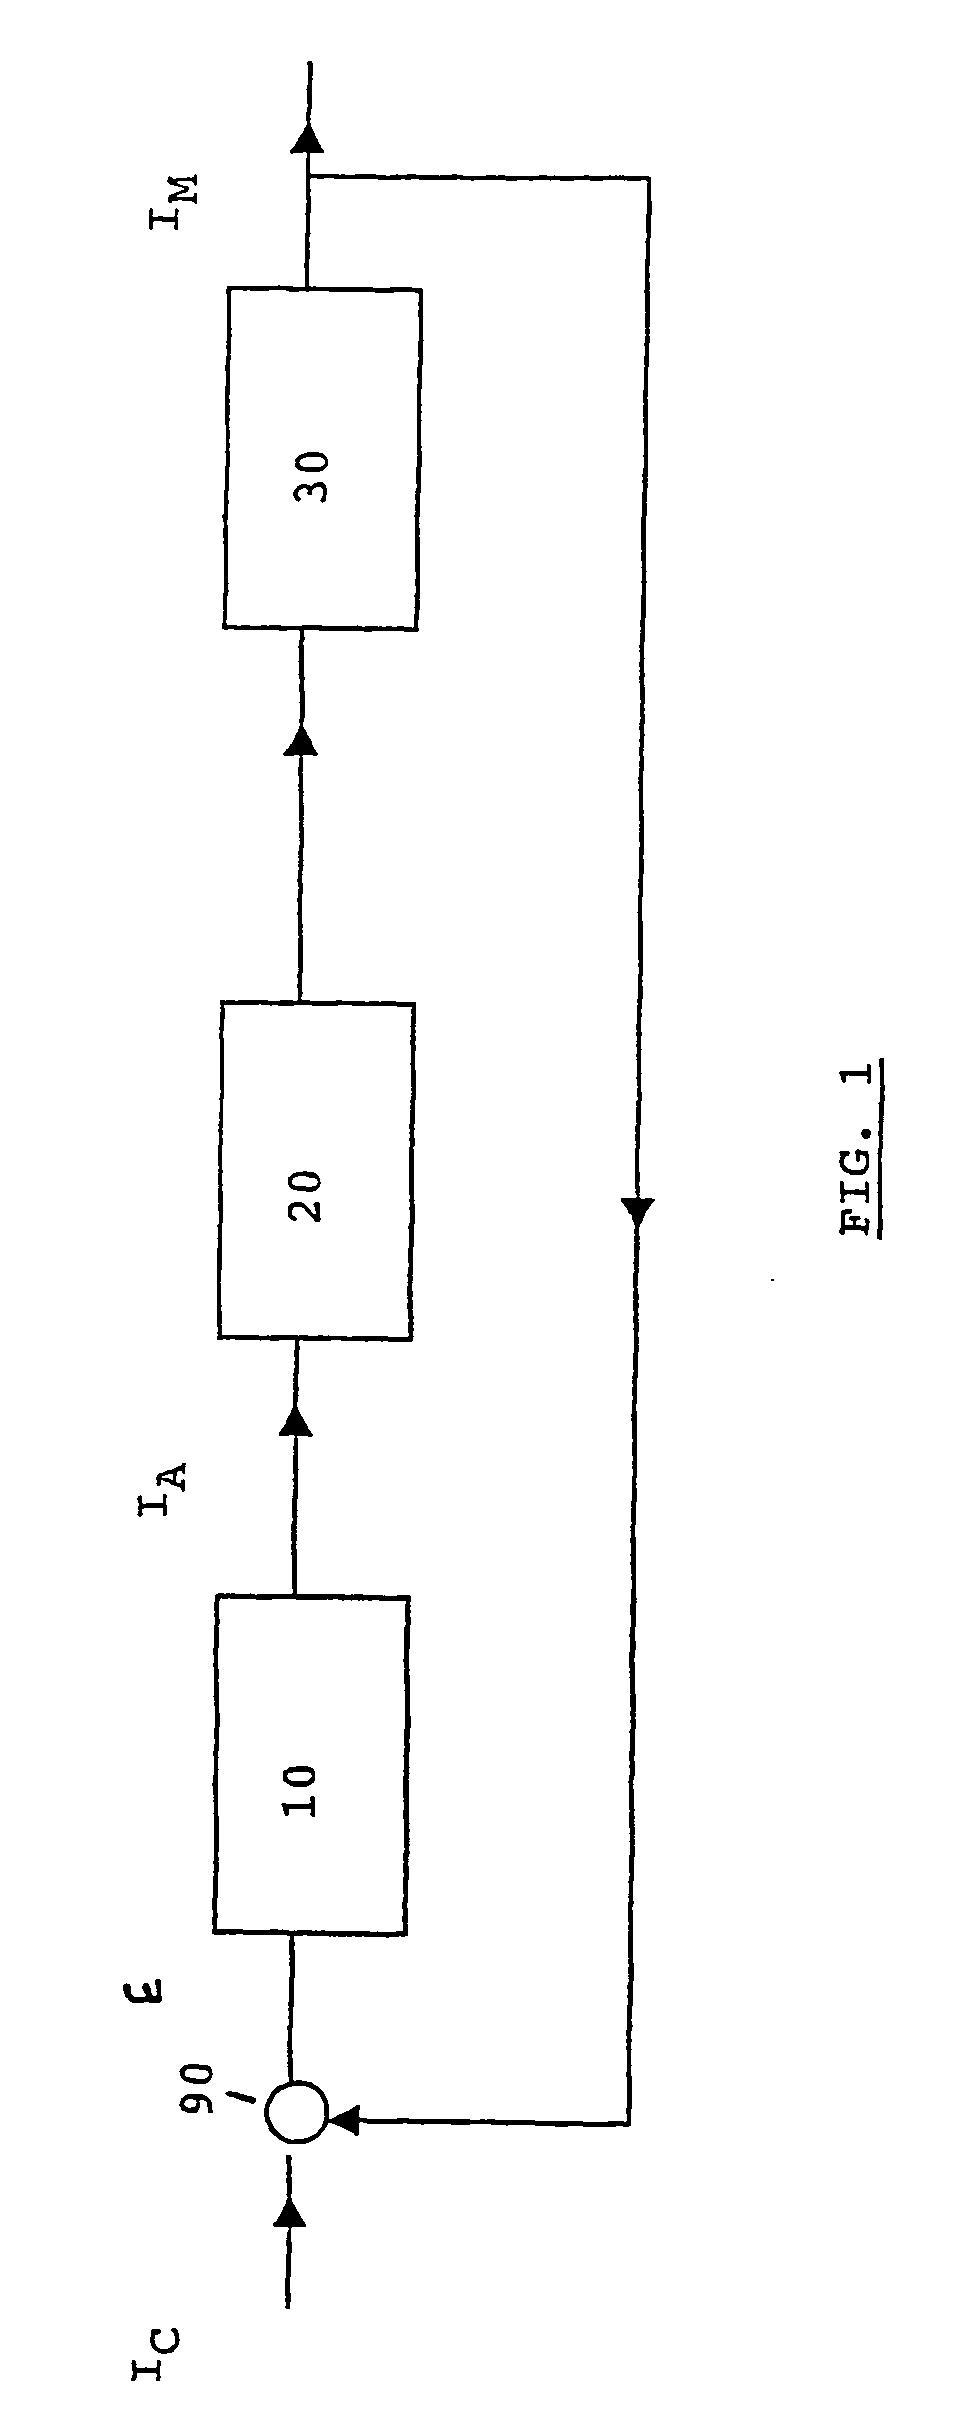 Device and method for regulating intensity of beam extracted from a particle accelerator